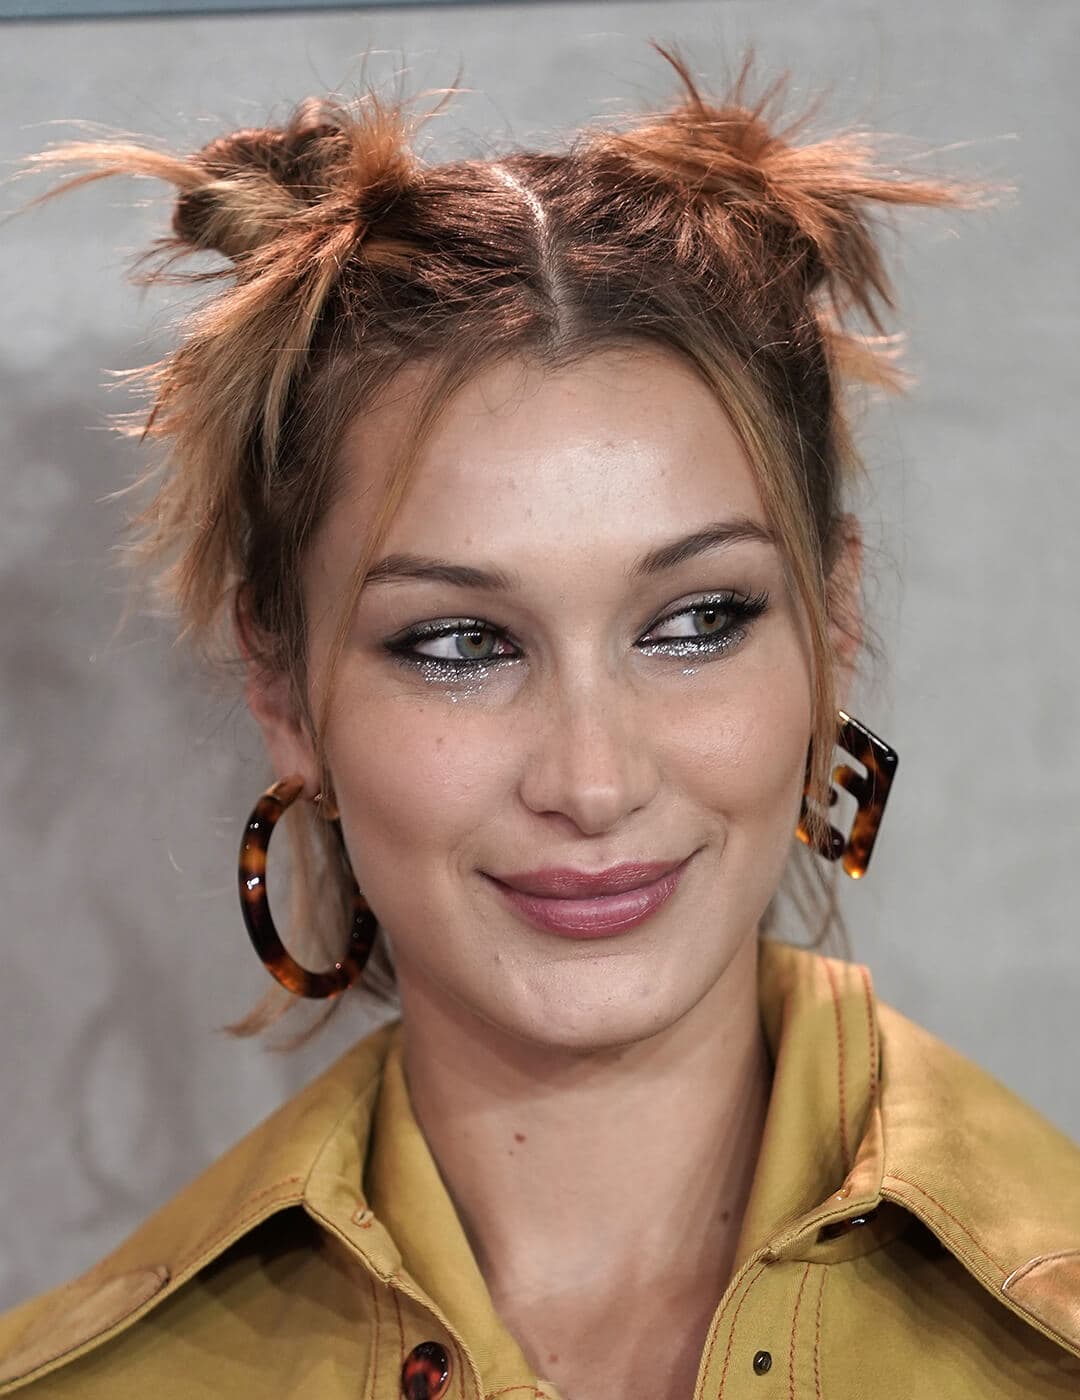 A photo of Bella Hadid with space buns wearing a yellow jacket and Fendi earrings